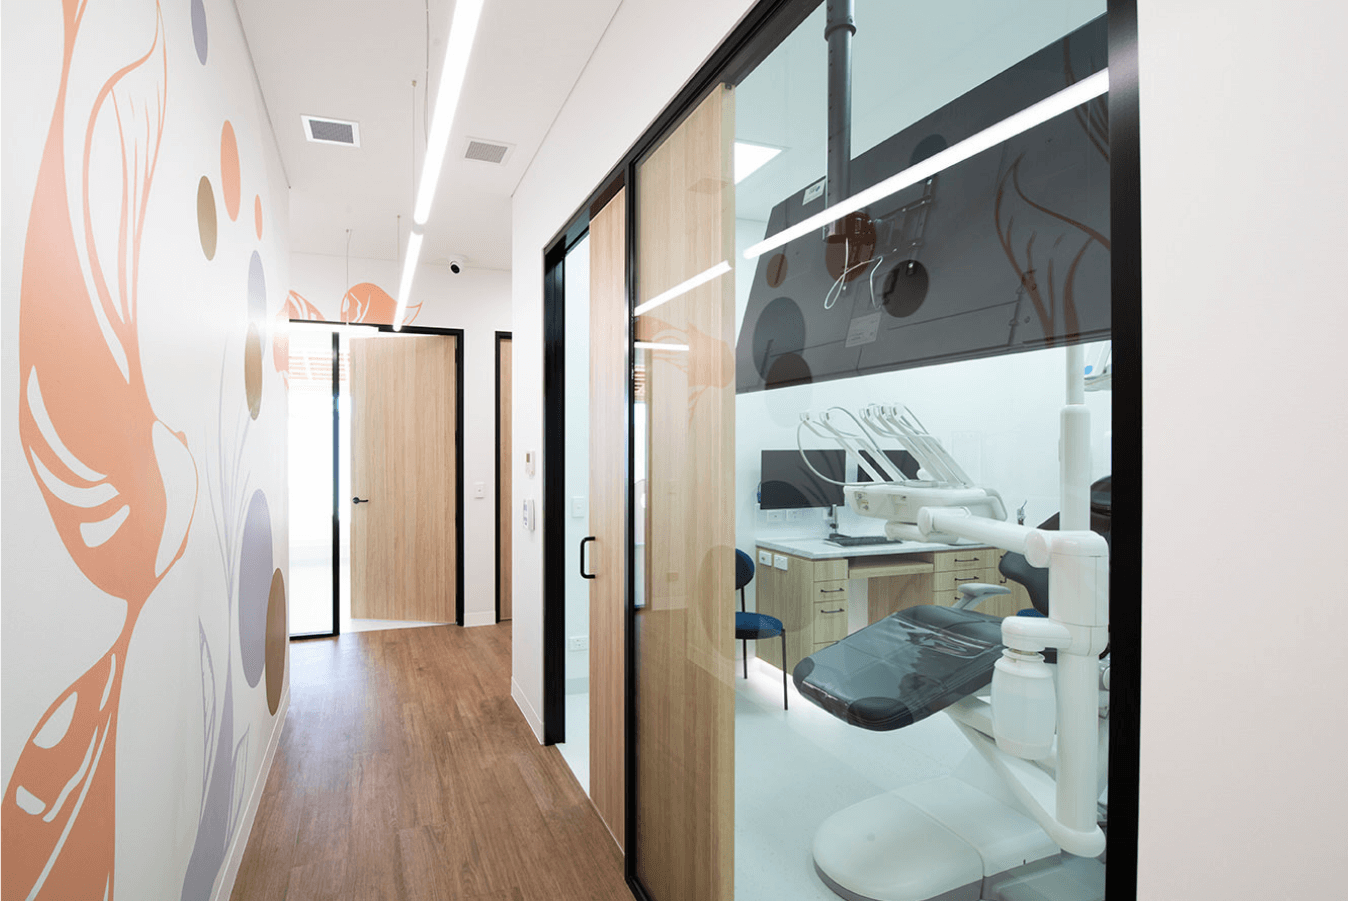 Northern Periodontics Electrical Fit Out